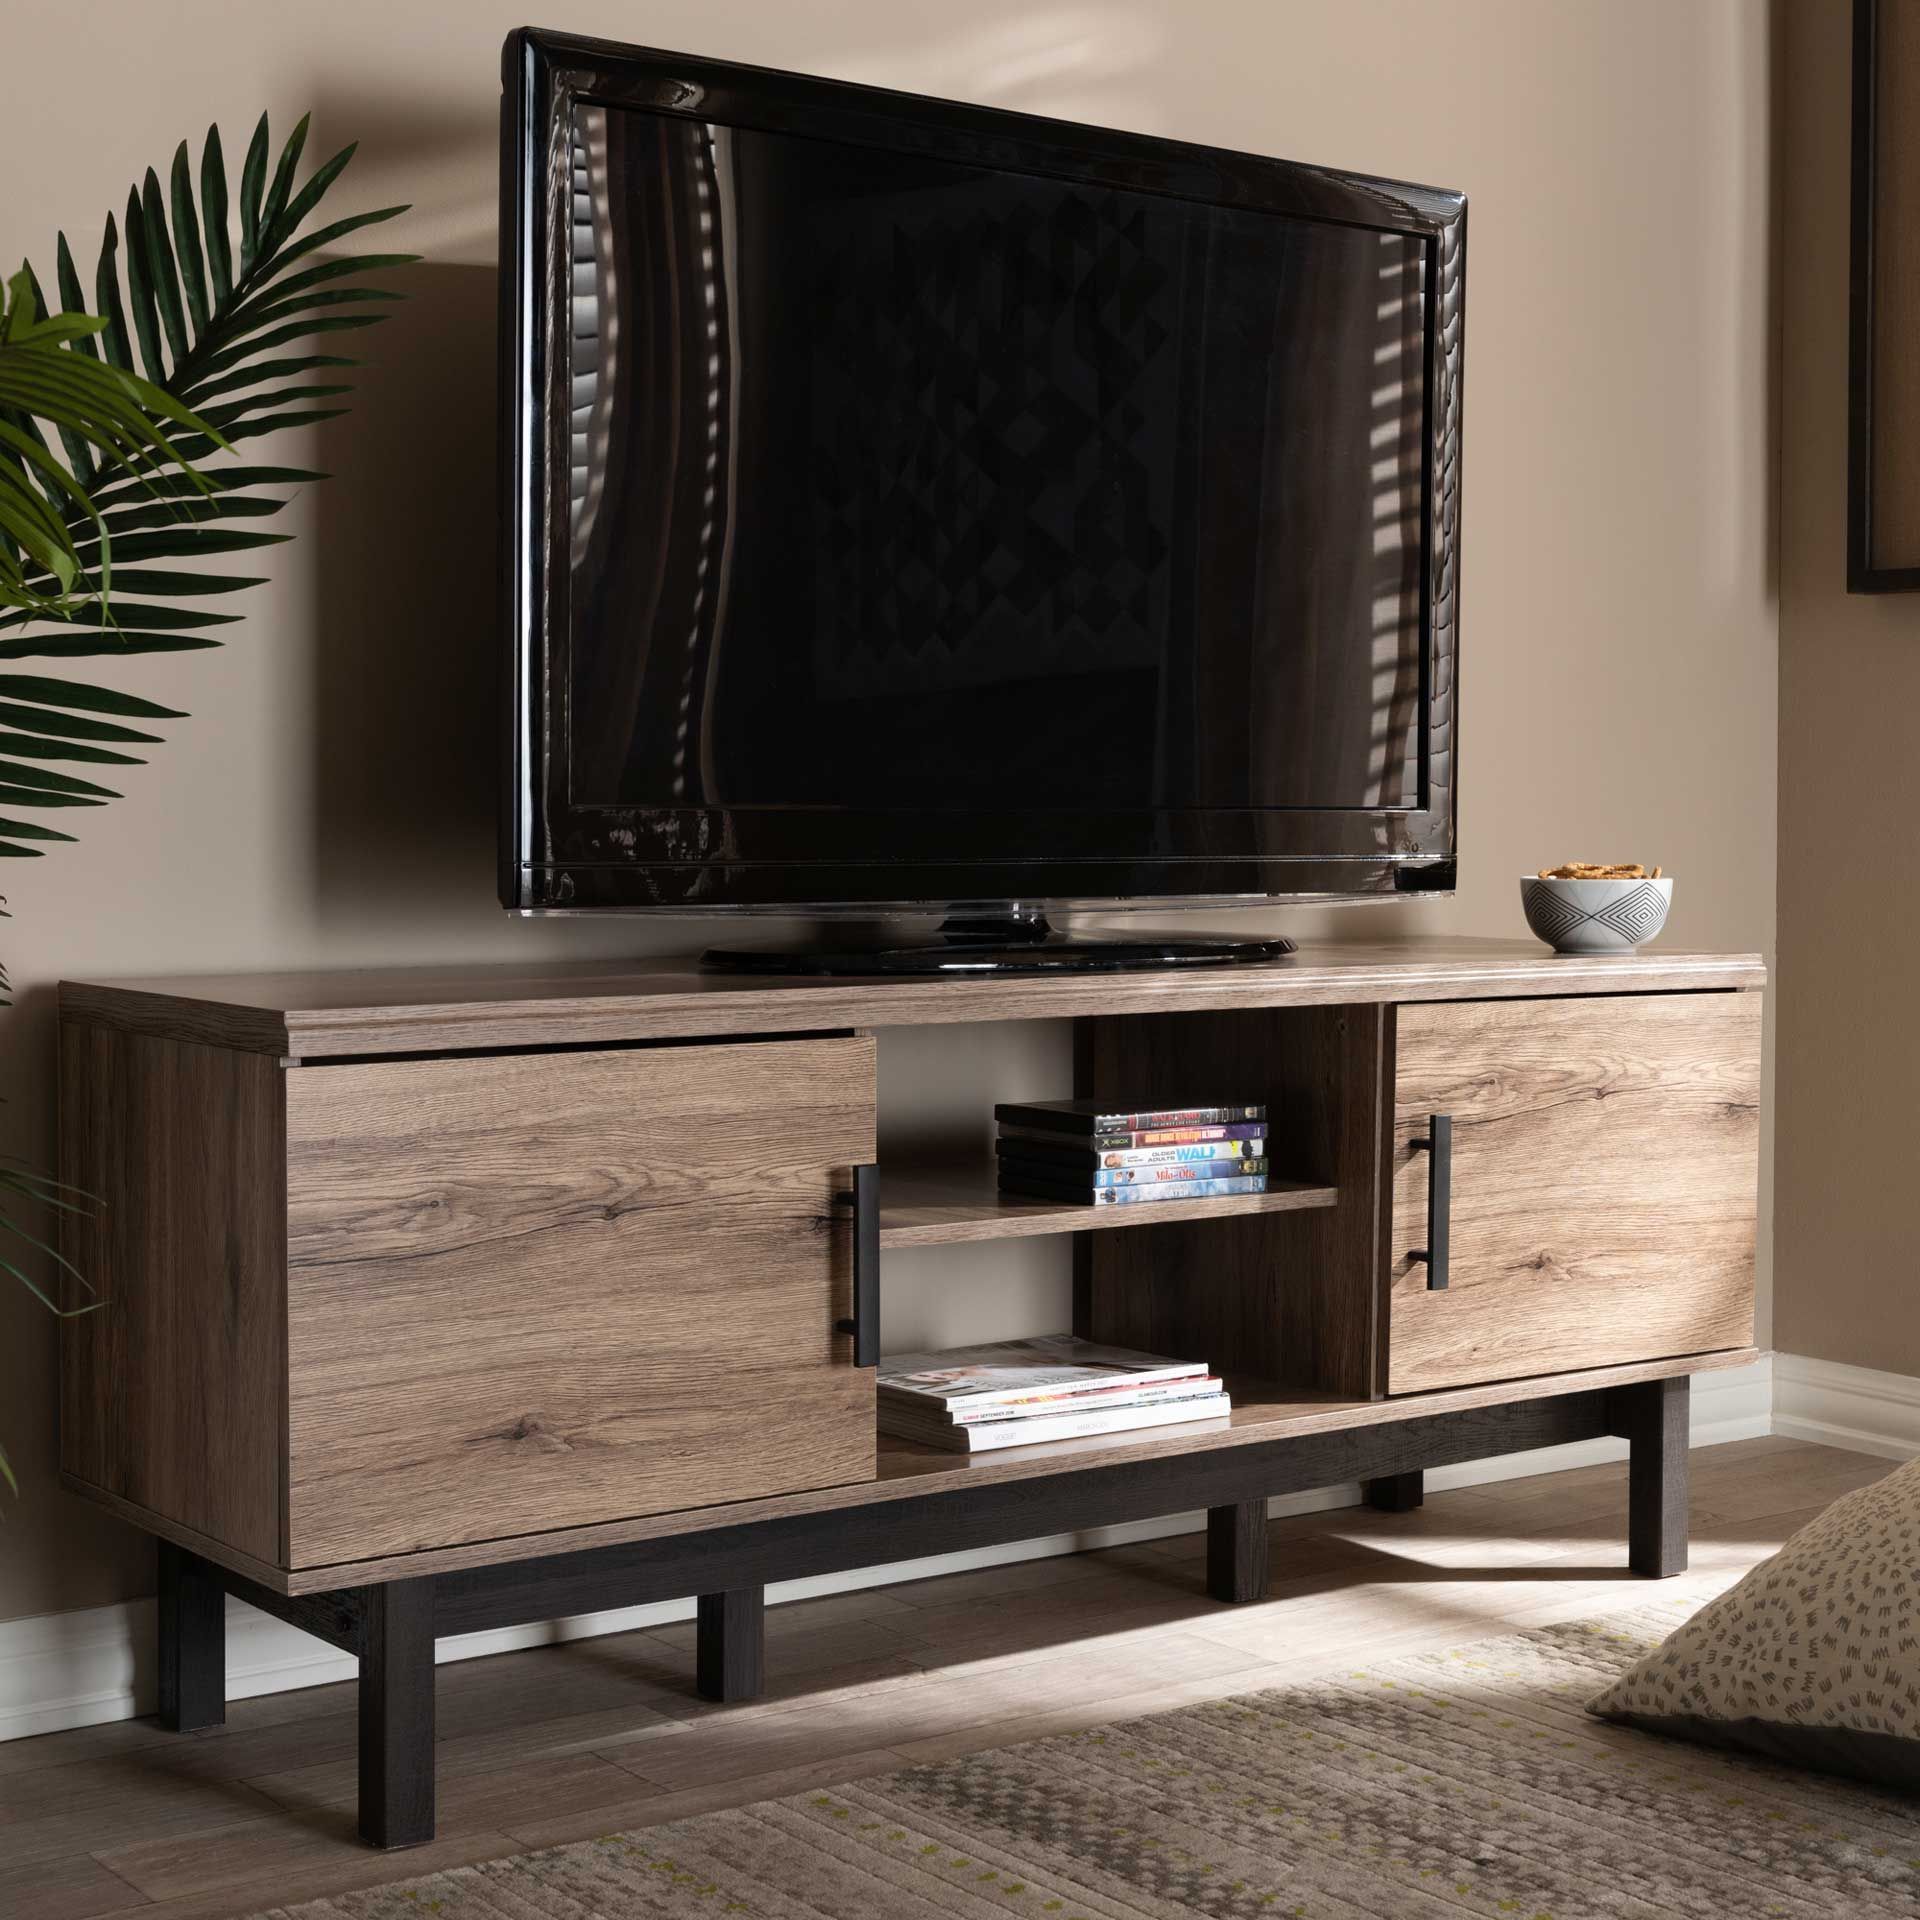 Clean Lines And A Display Of Natural Wood Grains Make The Ariel Tv Regarding Tv Stands With 2 Doors And 2 Open Shelves (View 3 of 20)